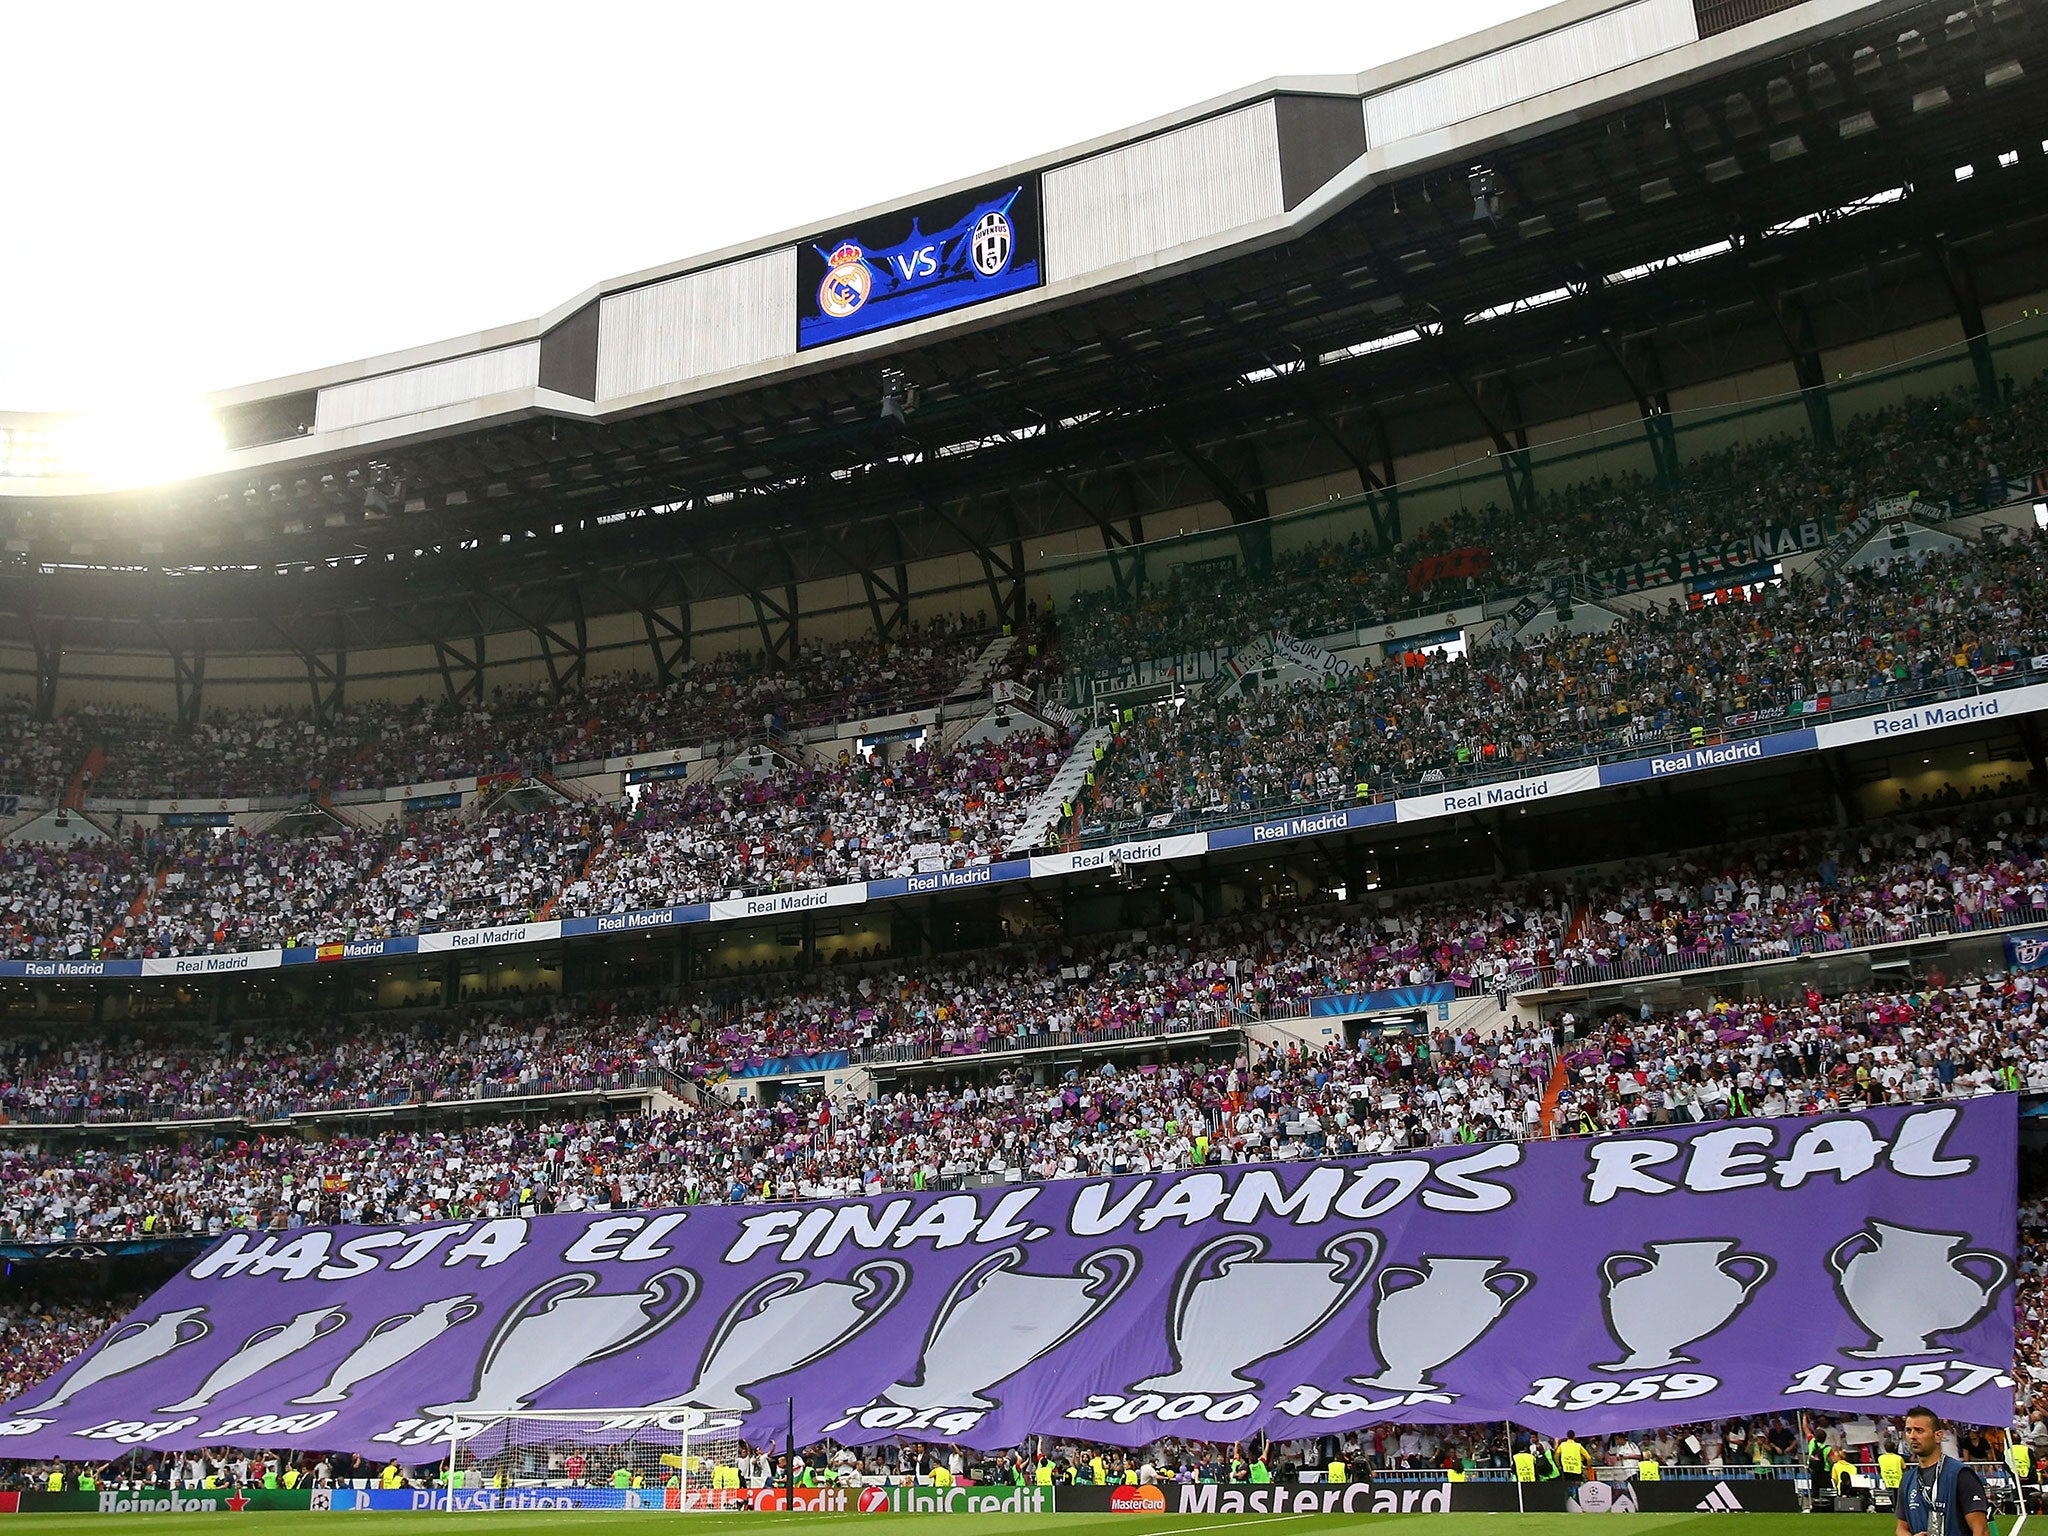 Real Madrid fans boast about their 10 European Cups